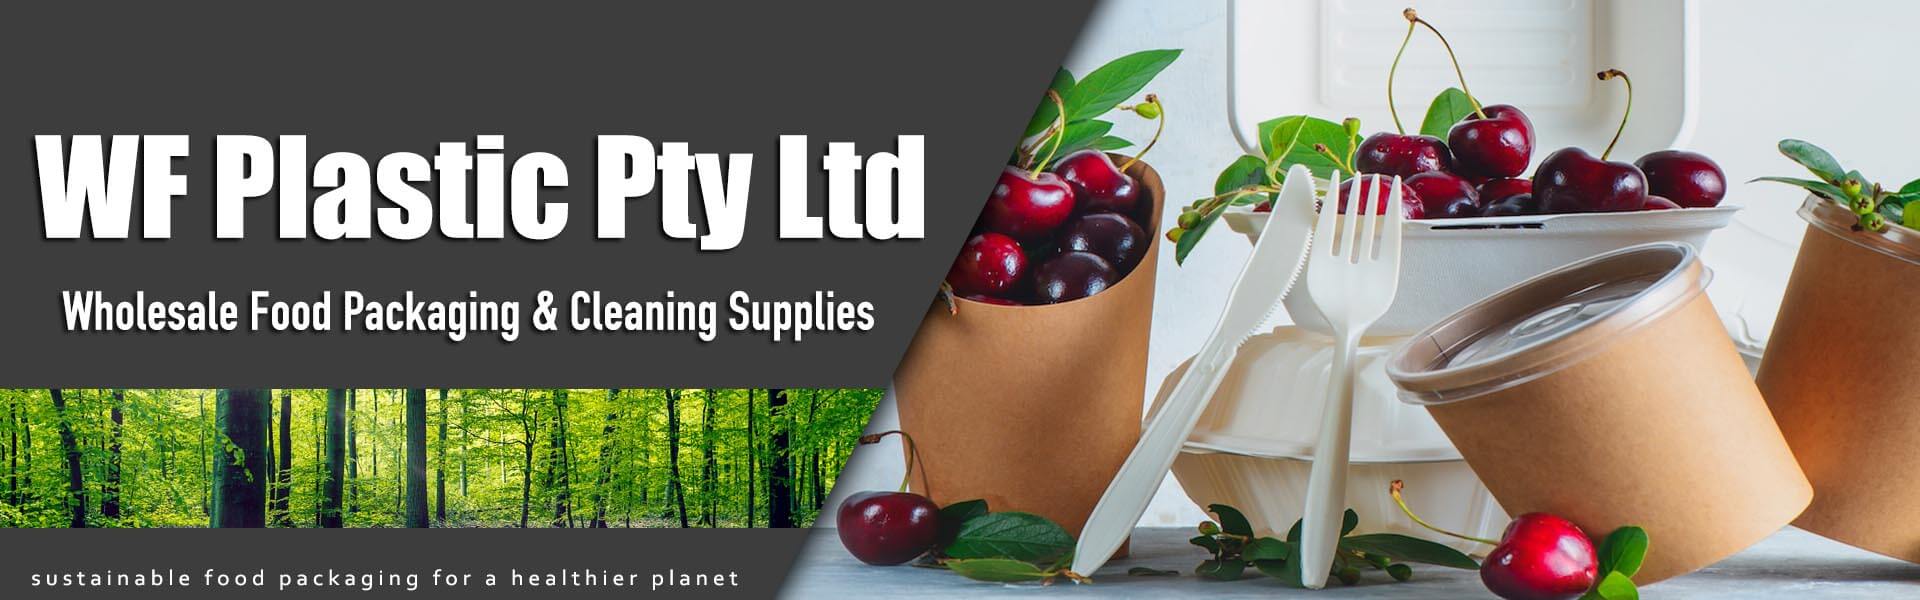 Mr. Plastics, Inc | Plastic food package supplier in Atlanta Georgia | Food  package supplier wholesale company | Plastic Bags | Food container | Foam  Trays | Package supplier. 11x19 LDPE Clear